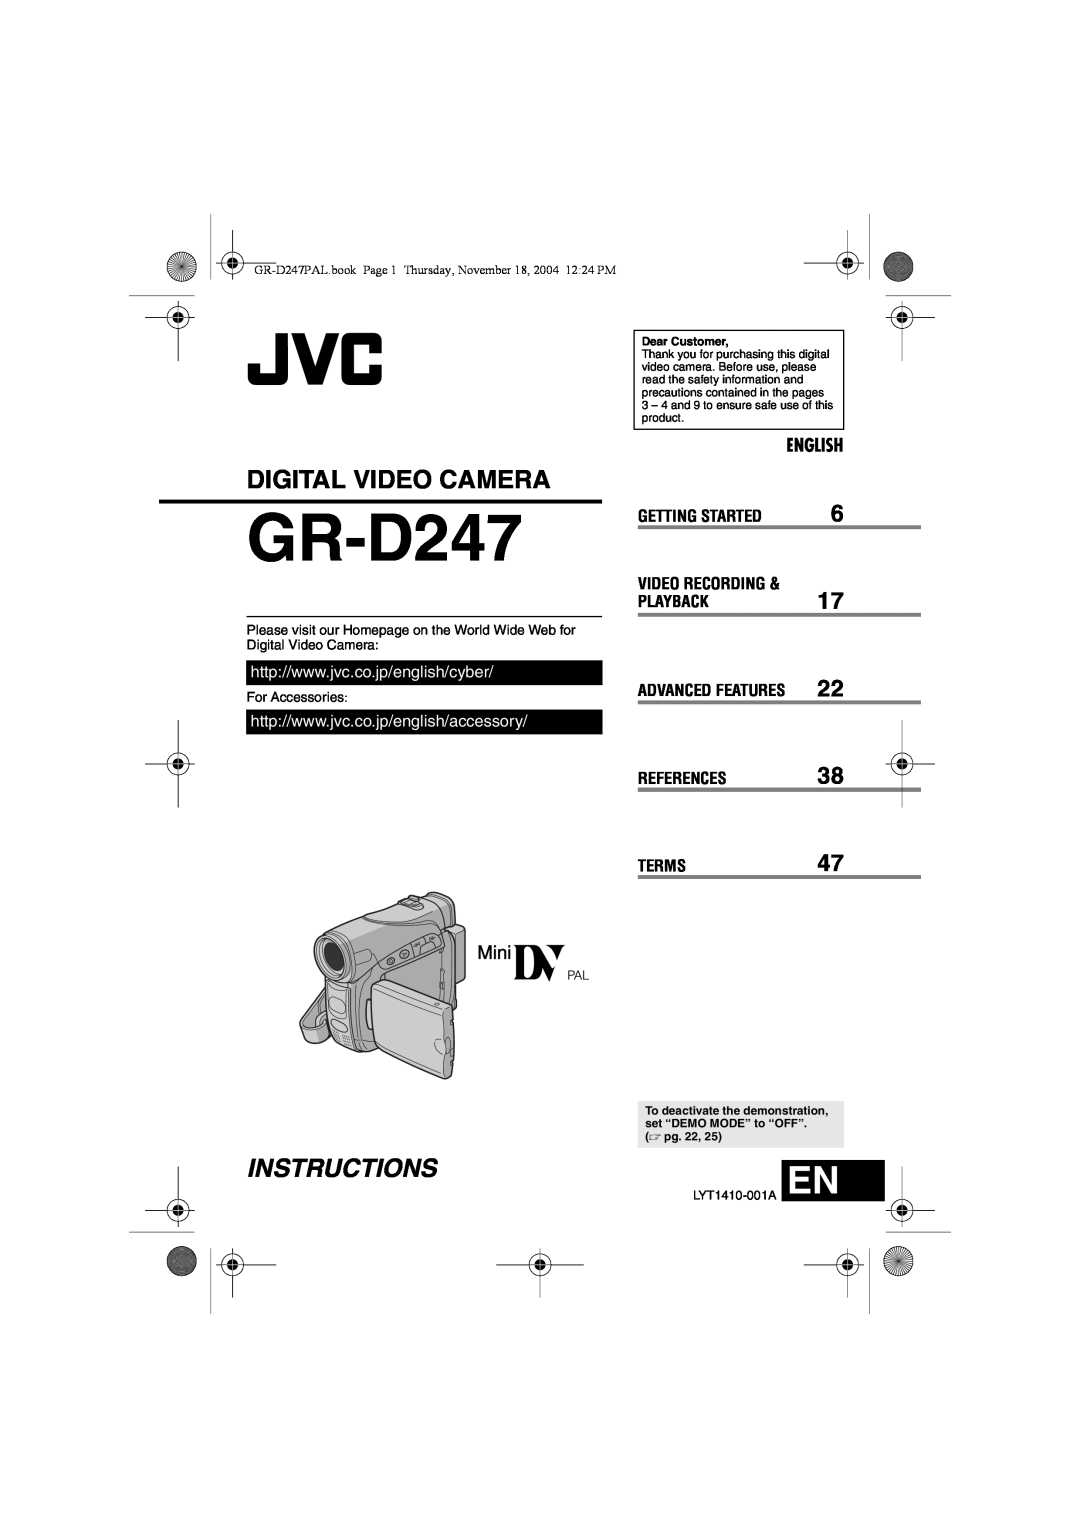 JVC GR-D247 manual English, Getting Started, VIDEO RECORDING PLAYBACK17 ADVANCED FEATURES REFERENCES38 TERMS47 